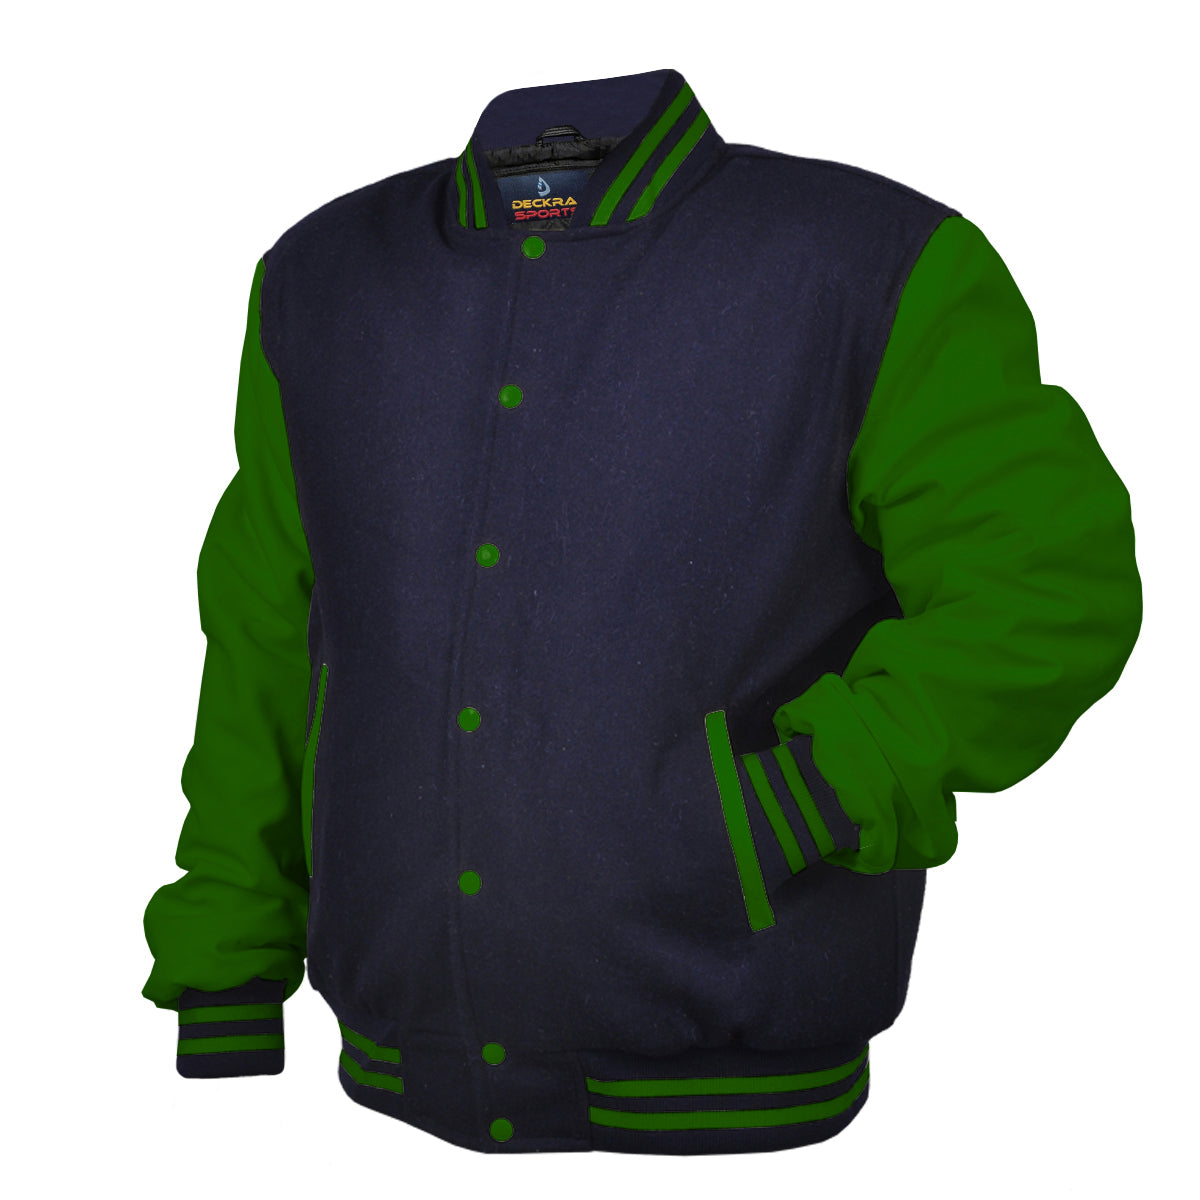 Woman Jacket Wool+Leather Navy Blue/Green